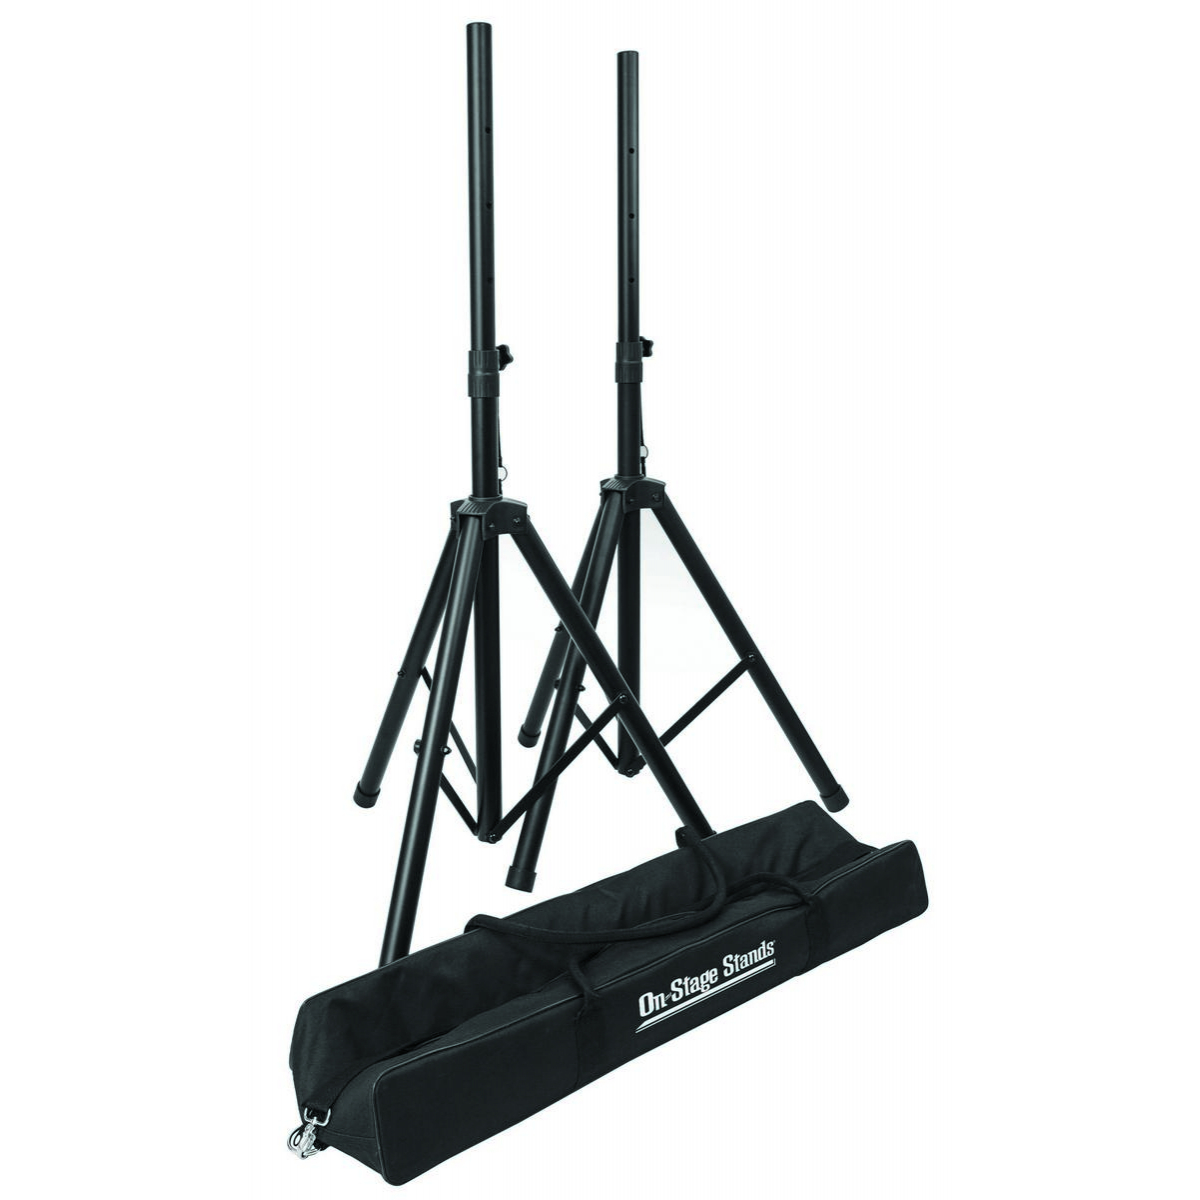 On-Stage SSP7750 Compact Speaker Stand Pak - image 1 of 8